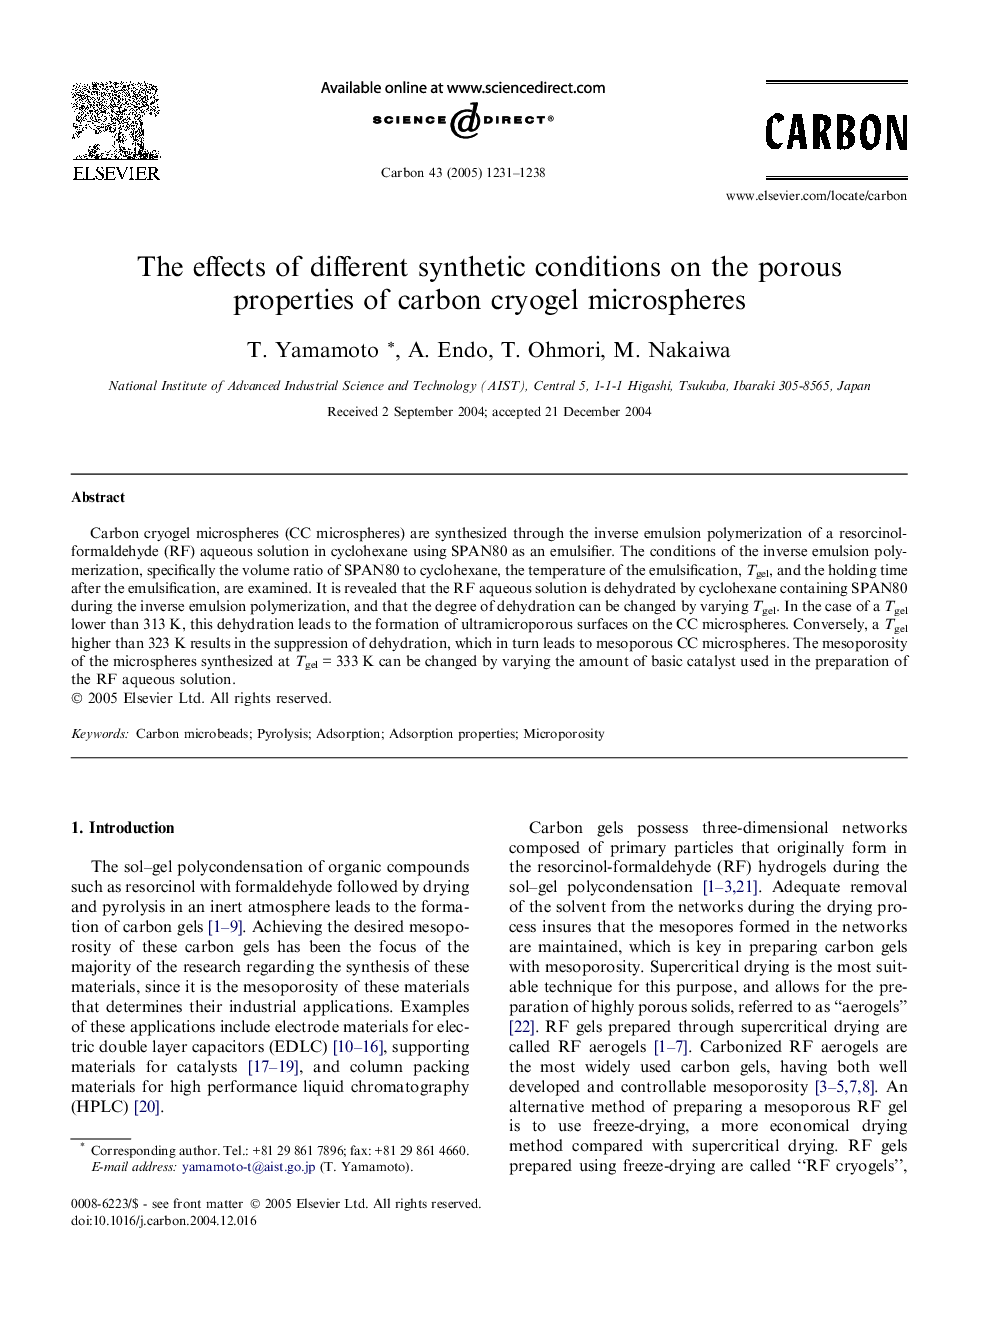 The effects of different synthetic conditions on the porous properties of carbon cryogel microspheres